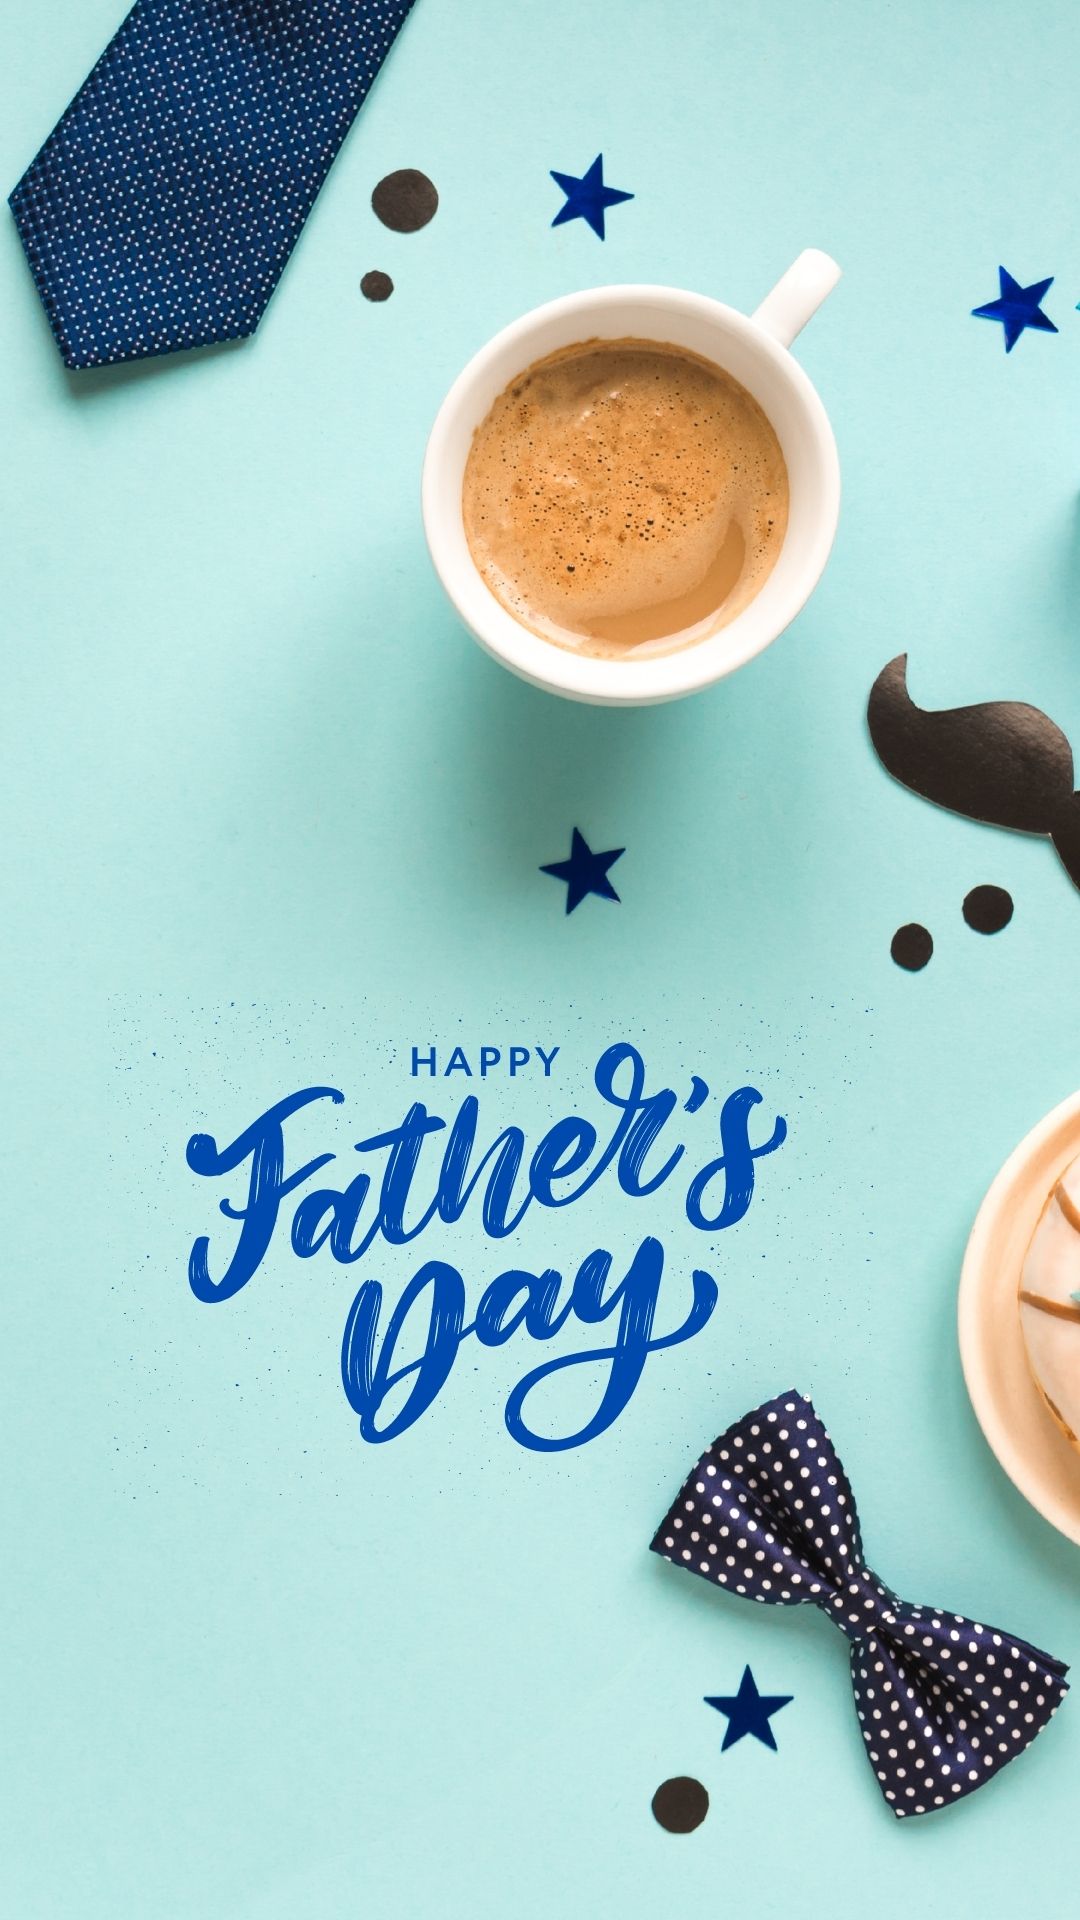 best happy father's day wishes images for instagram story (17)